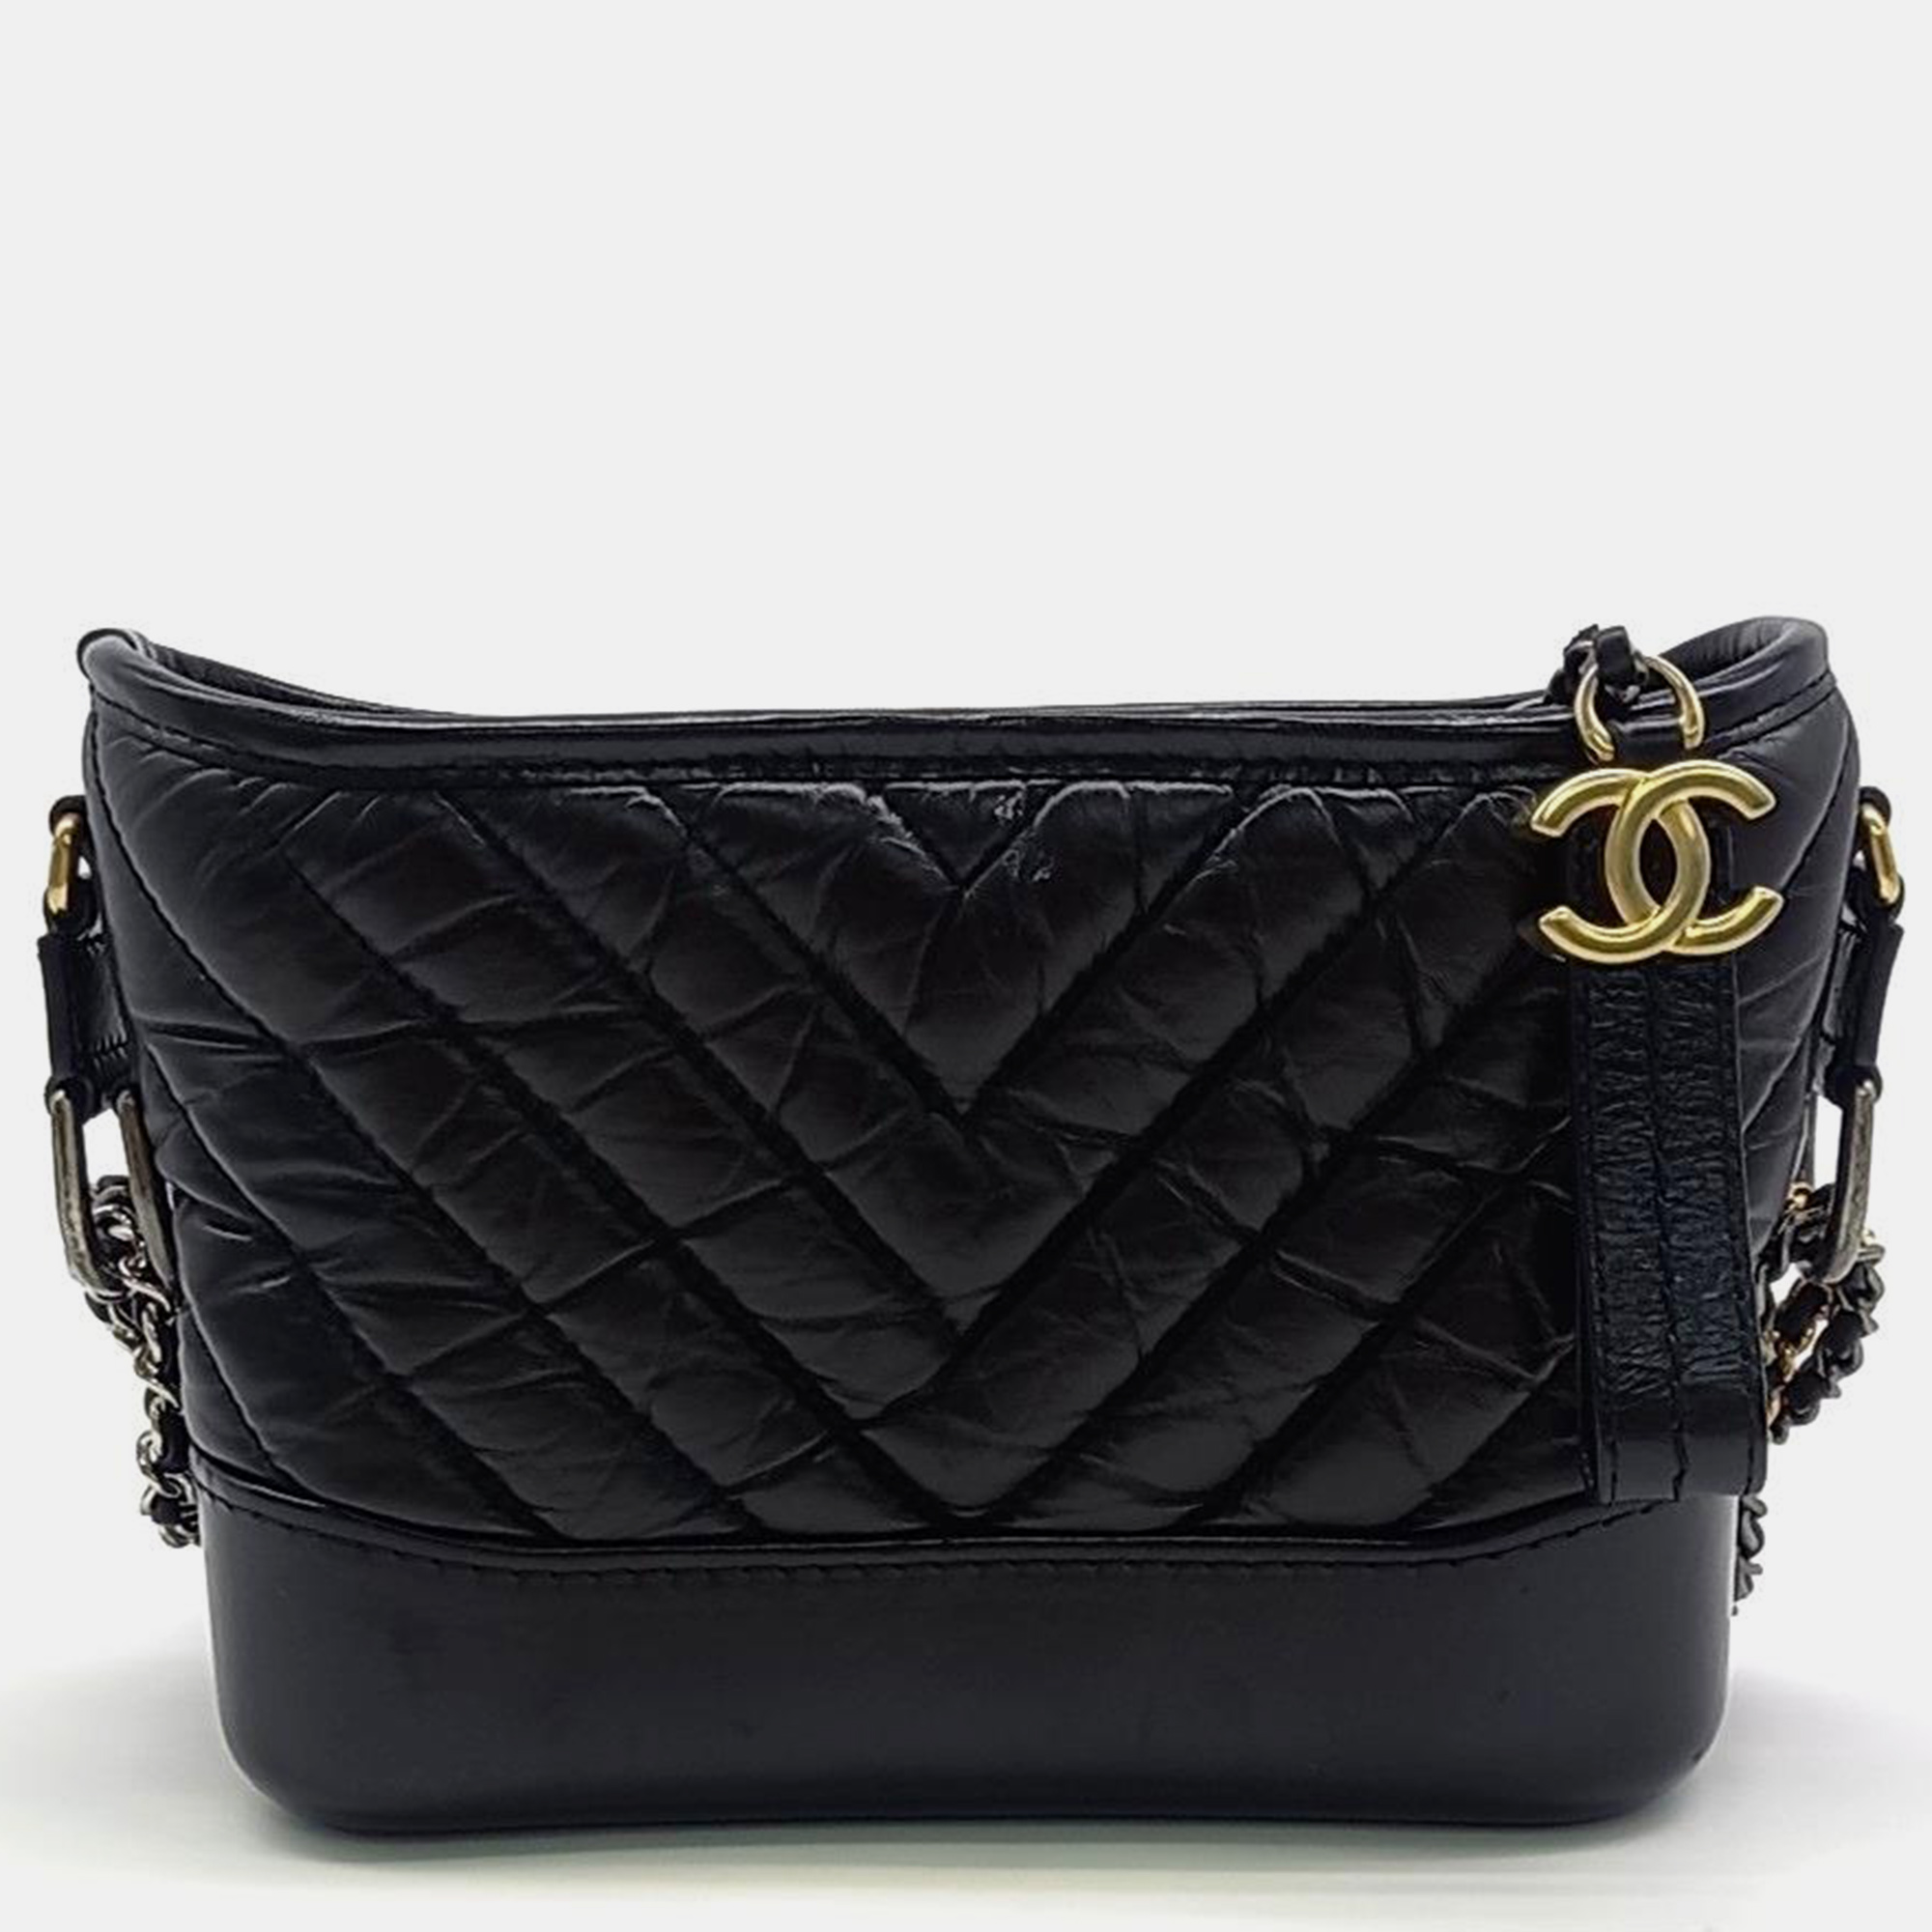 Chanel black leather gabrielle small hobo bag